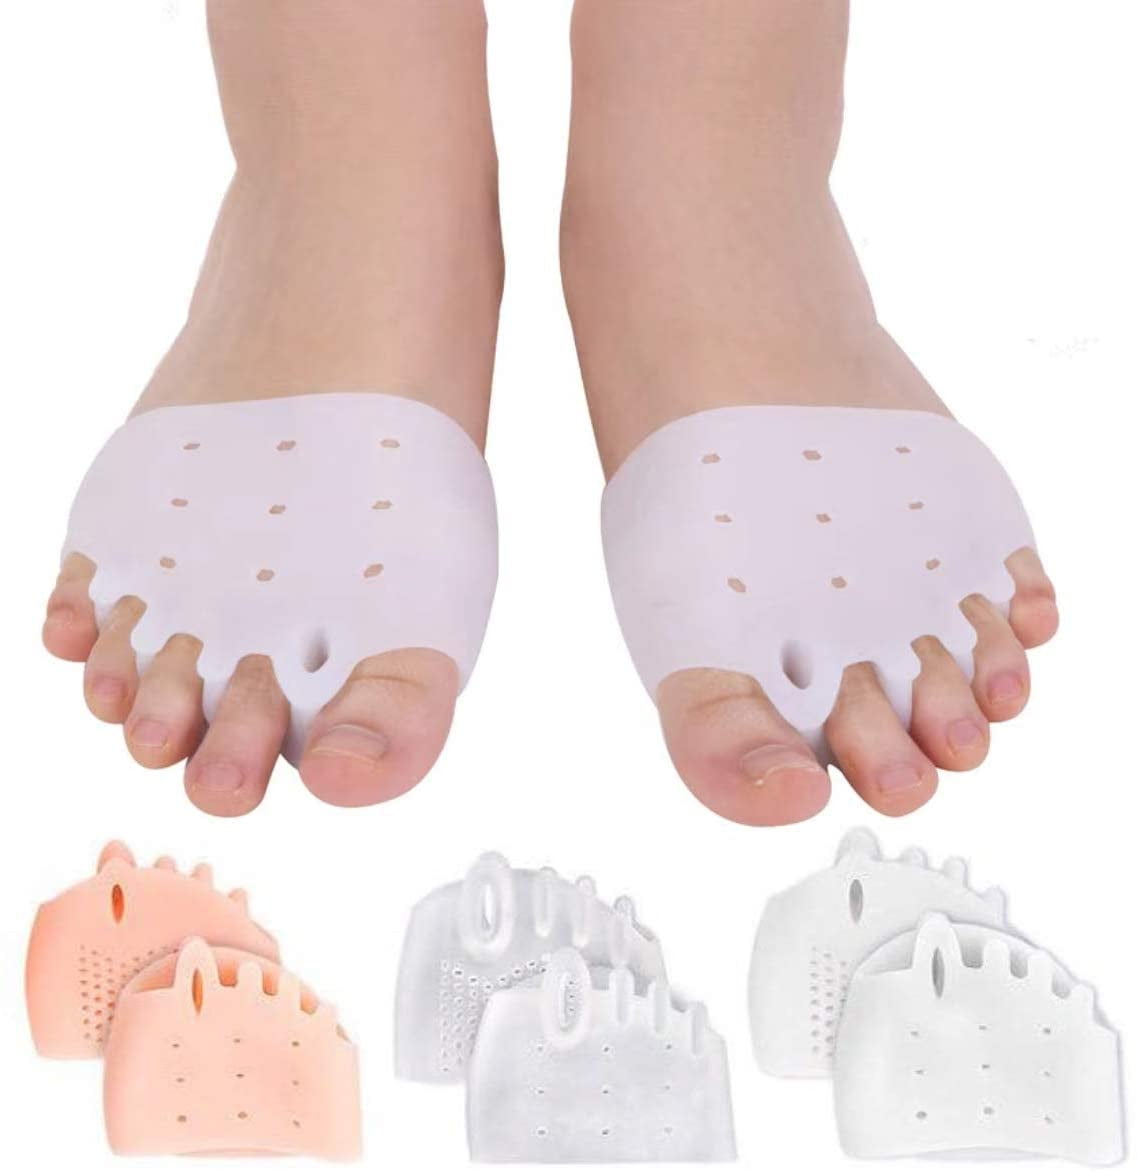 Footful Ball Of Foot Gel Pads Cushion Forefoot Metatarsal Morton's Neuroma Care 